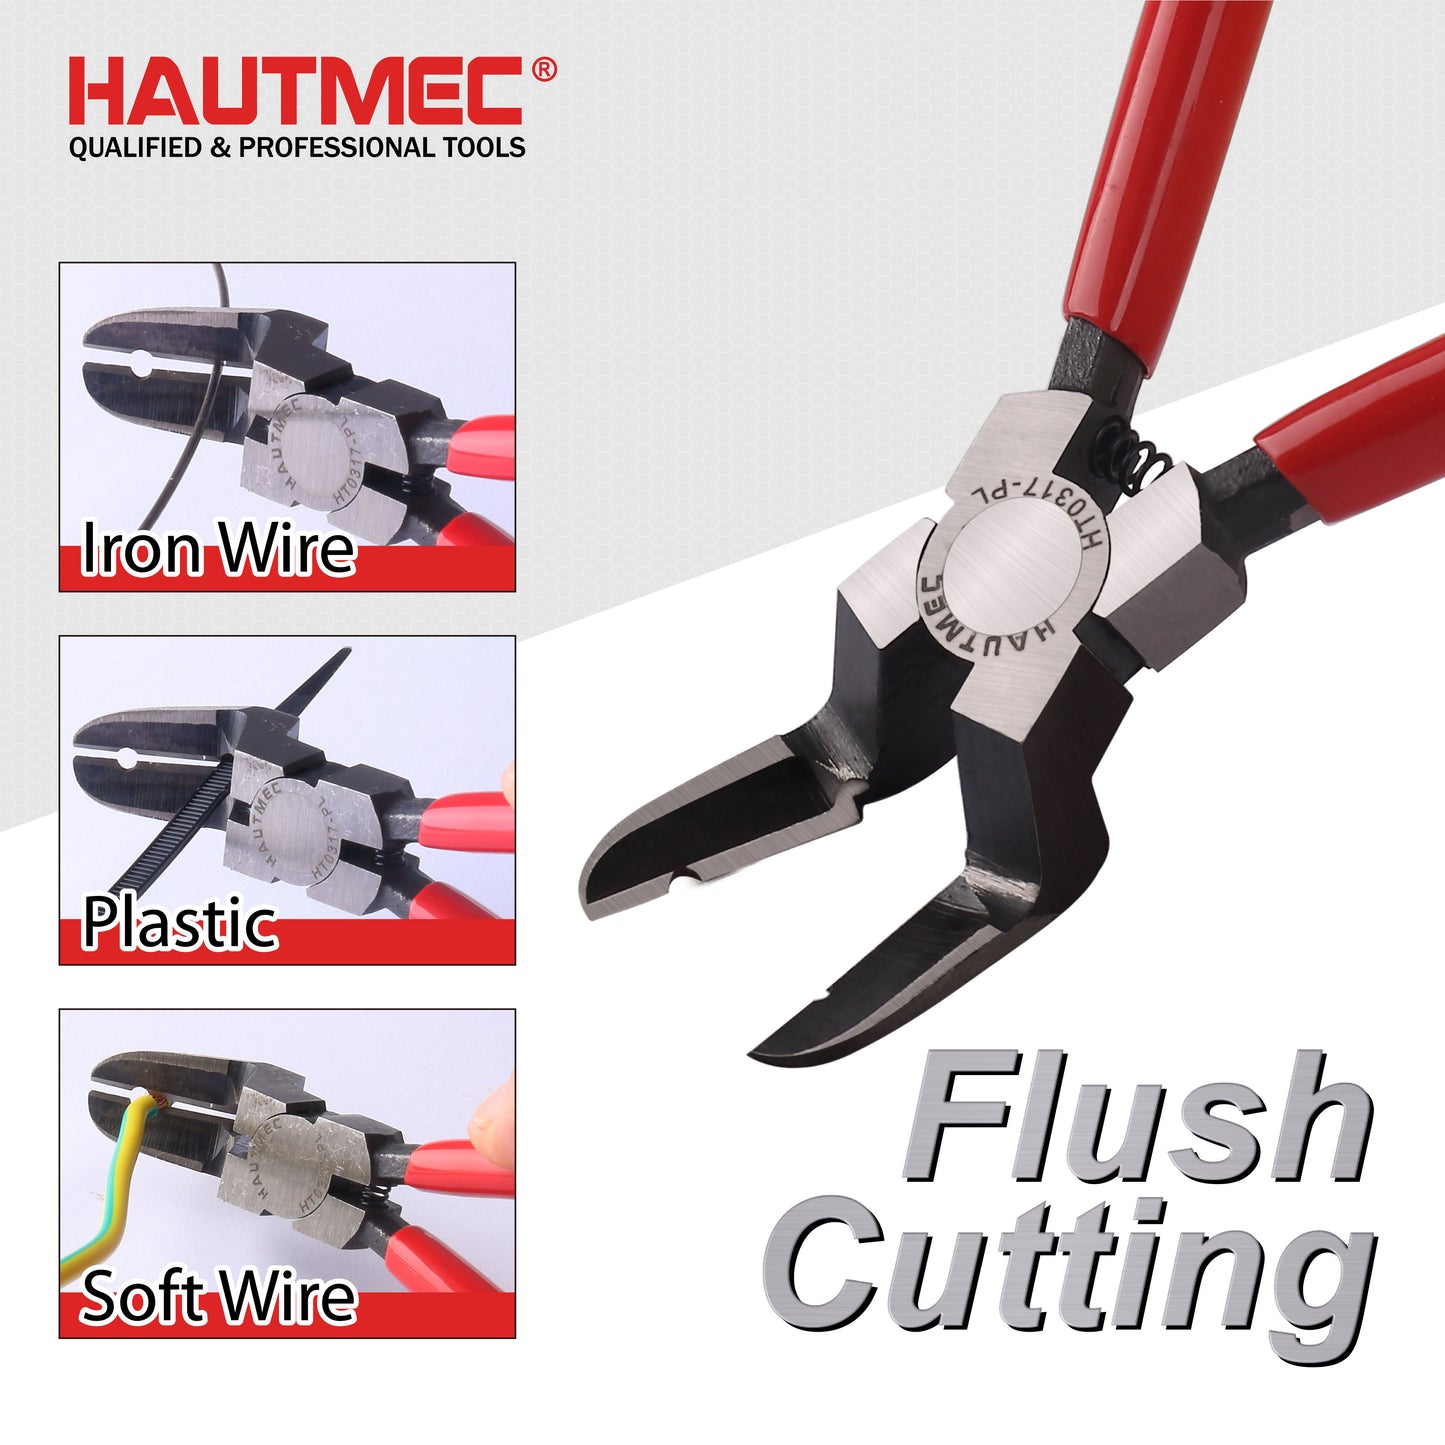 HAUTMEC 7 inch Panel Clip Removal Pliers Multifunction Flush Cut Pliers for Rivet and autobody tools and equipment HT0317